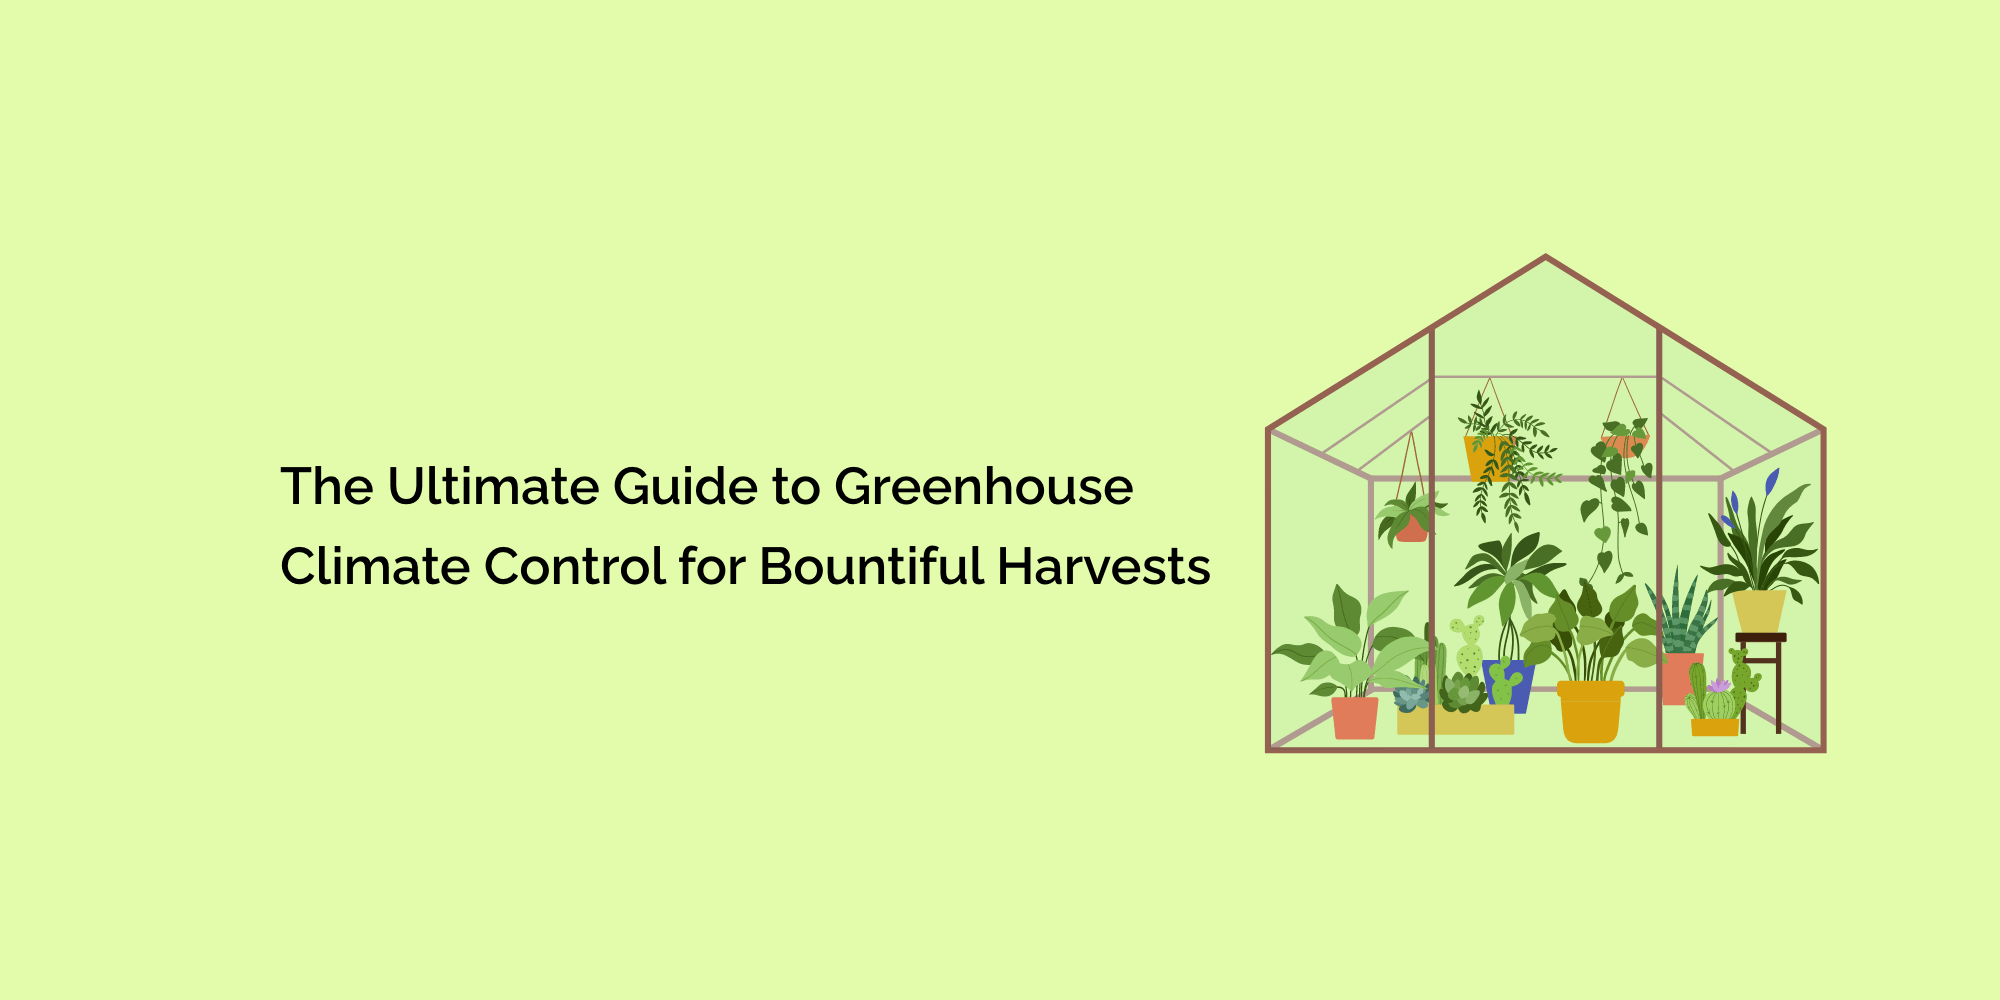 The Ultimate Guide to Greenhouse Climate Control for Bountiful Harvests